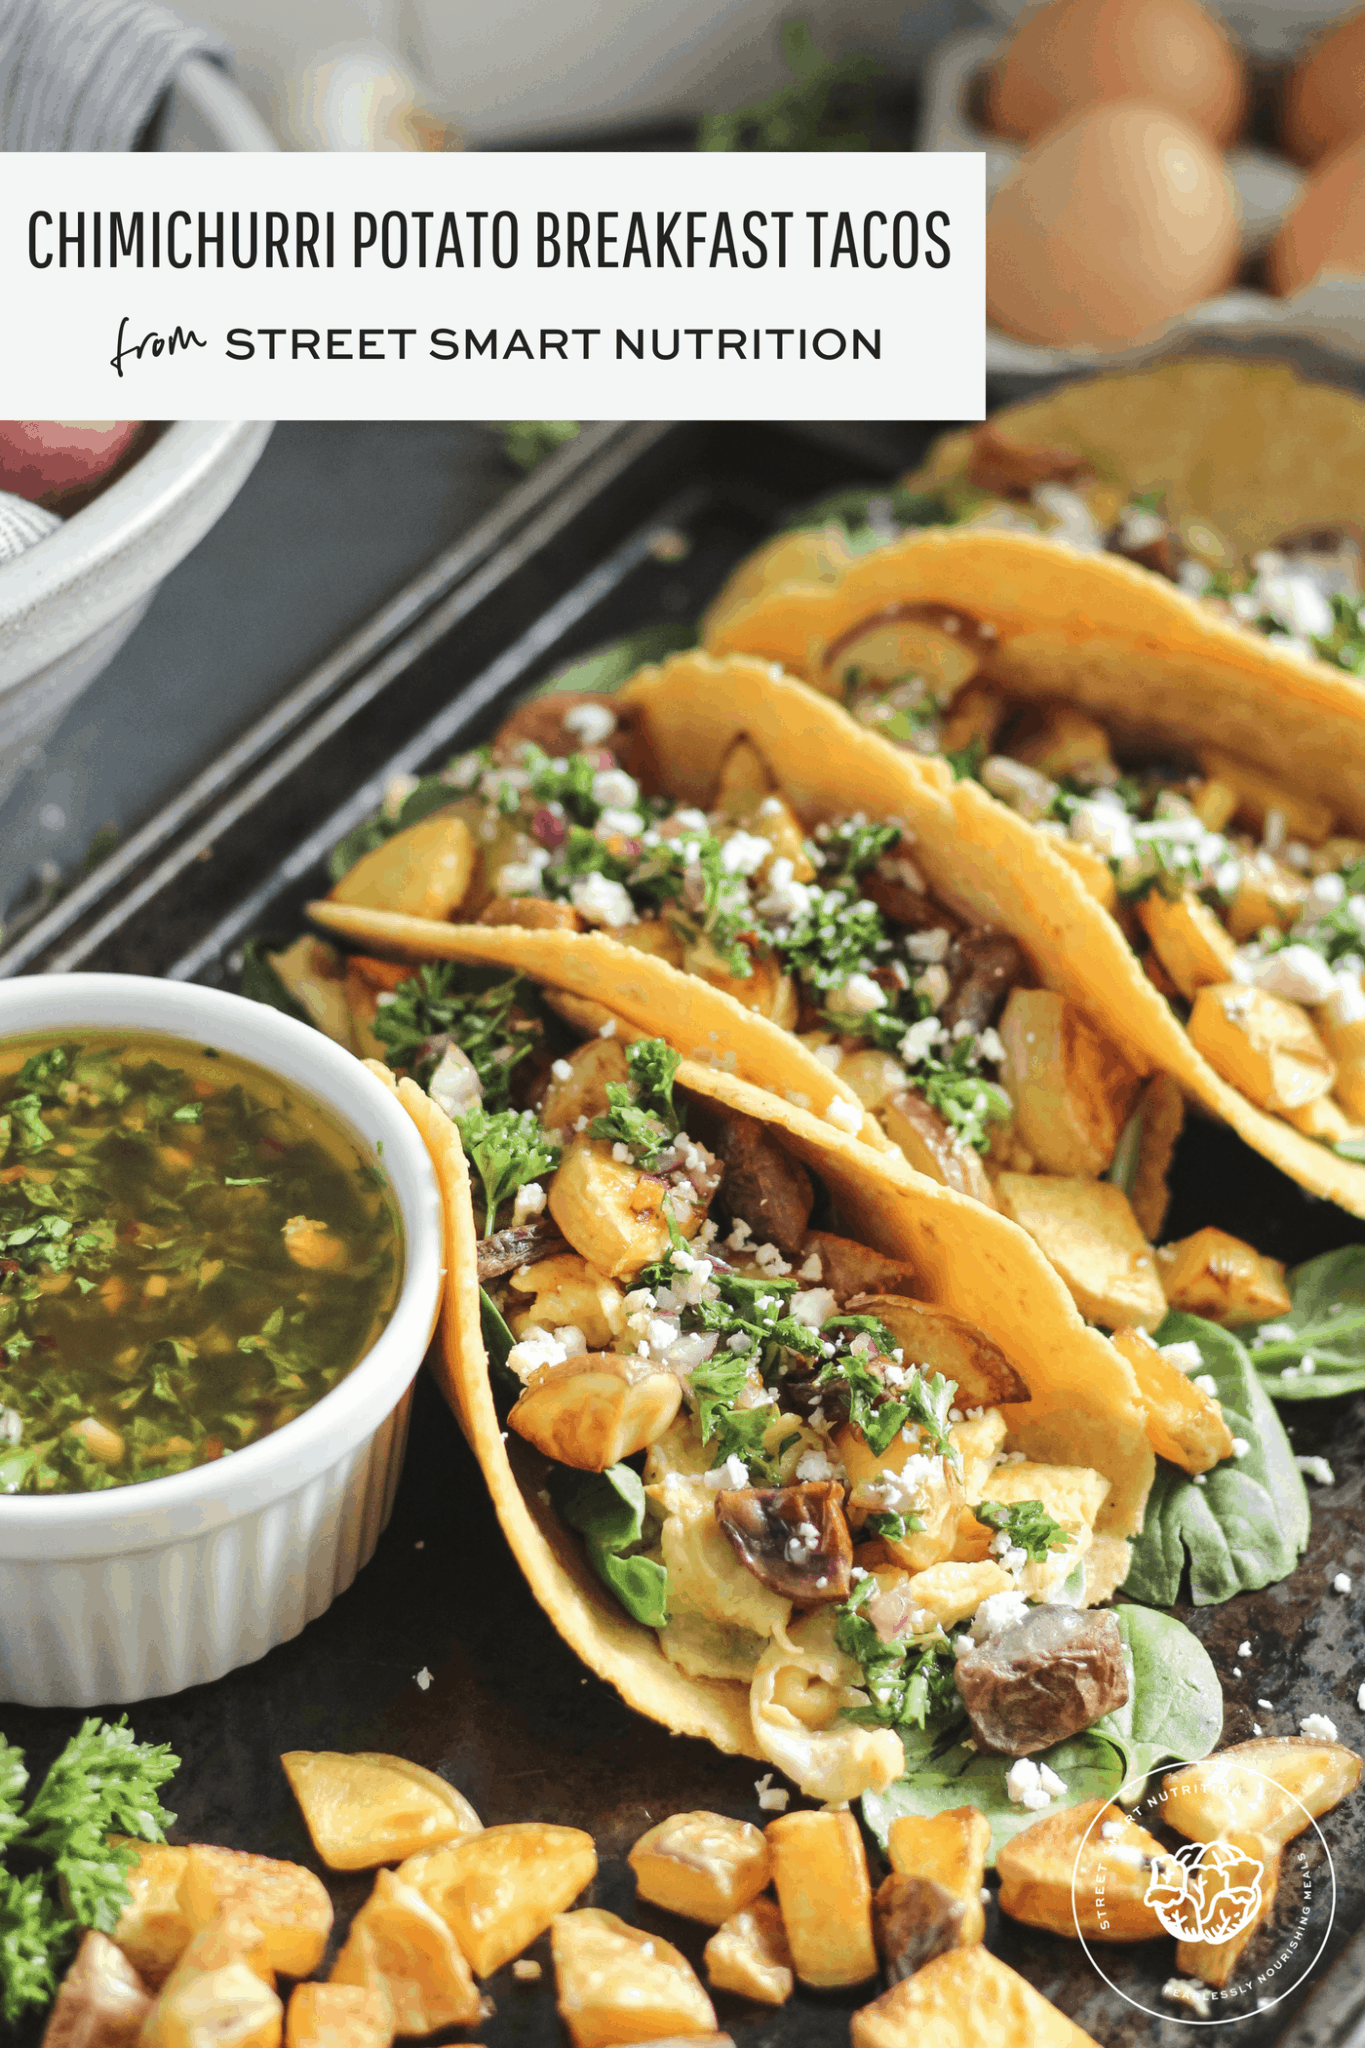 Chimichurri Potato Breakfast Tacos are easy to prepare ahead of time so you can refuel quickly after training